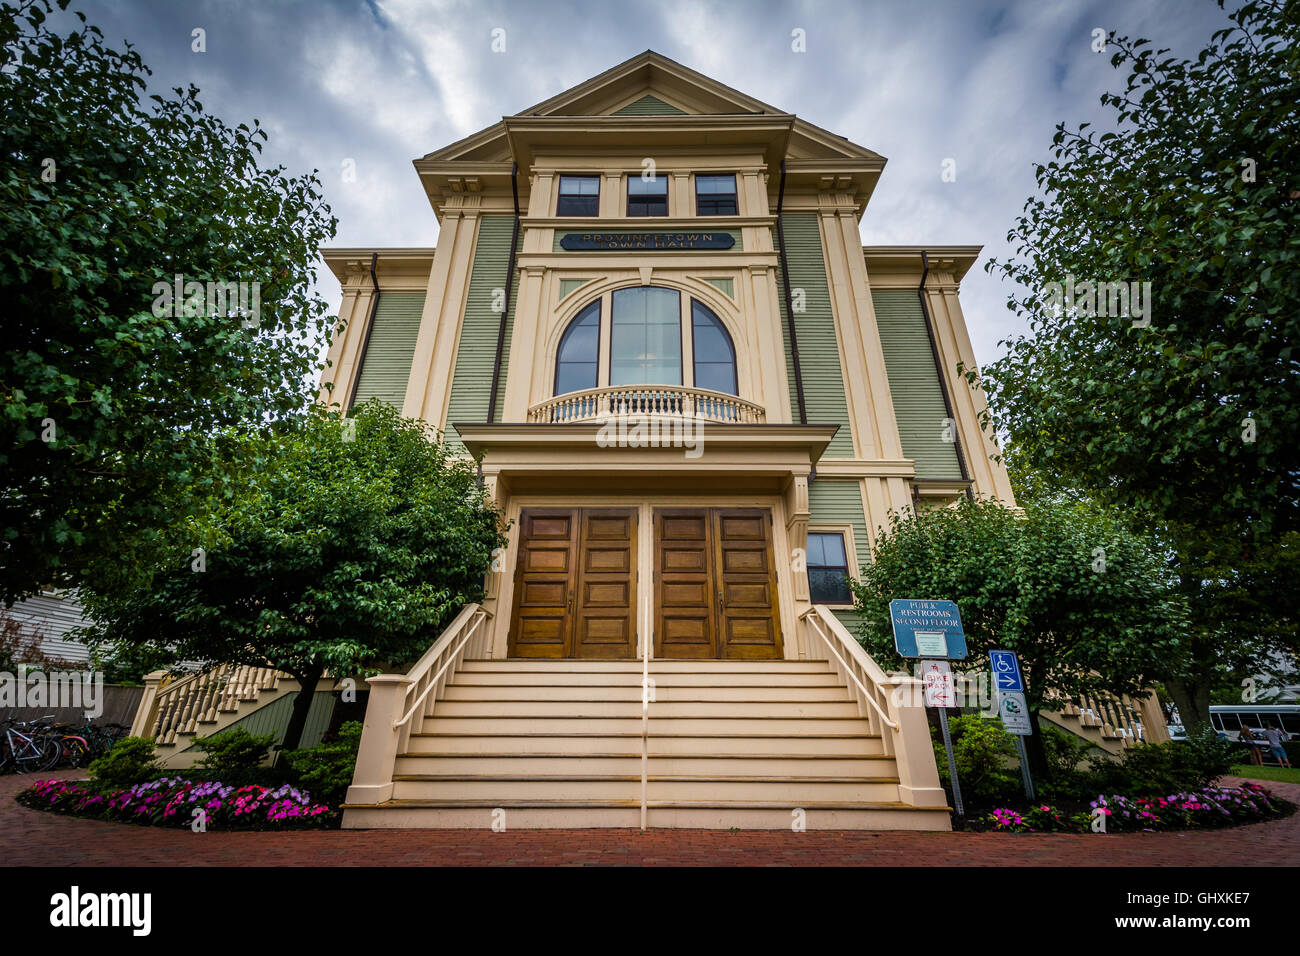 A Provincetown Town Hall, a Provincetown, Cape Cod, Massachusetts. Foto Stock